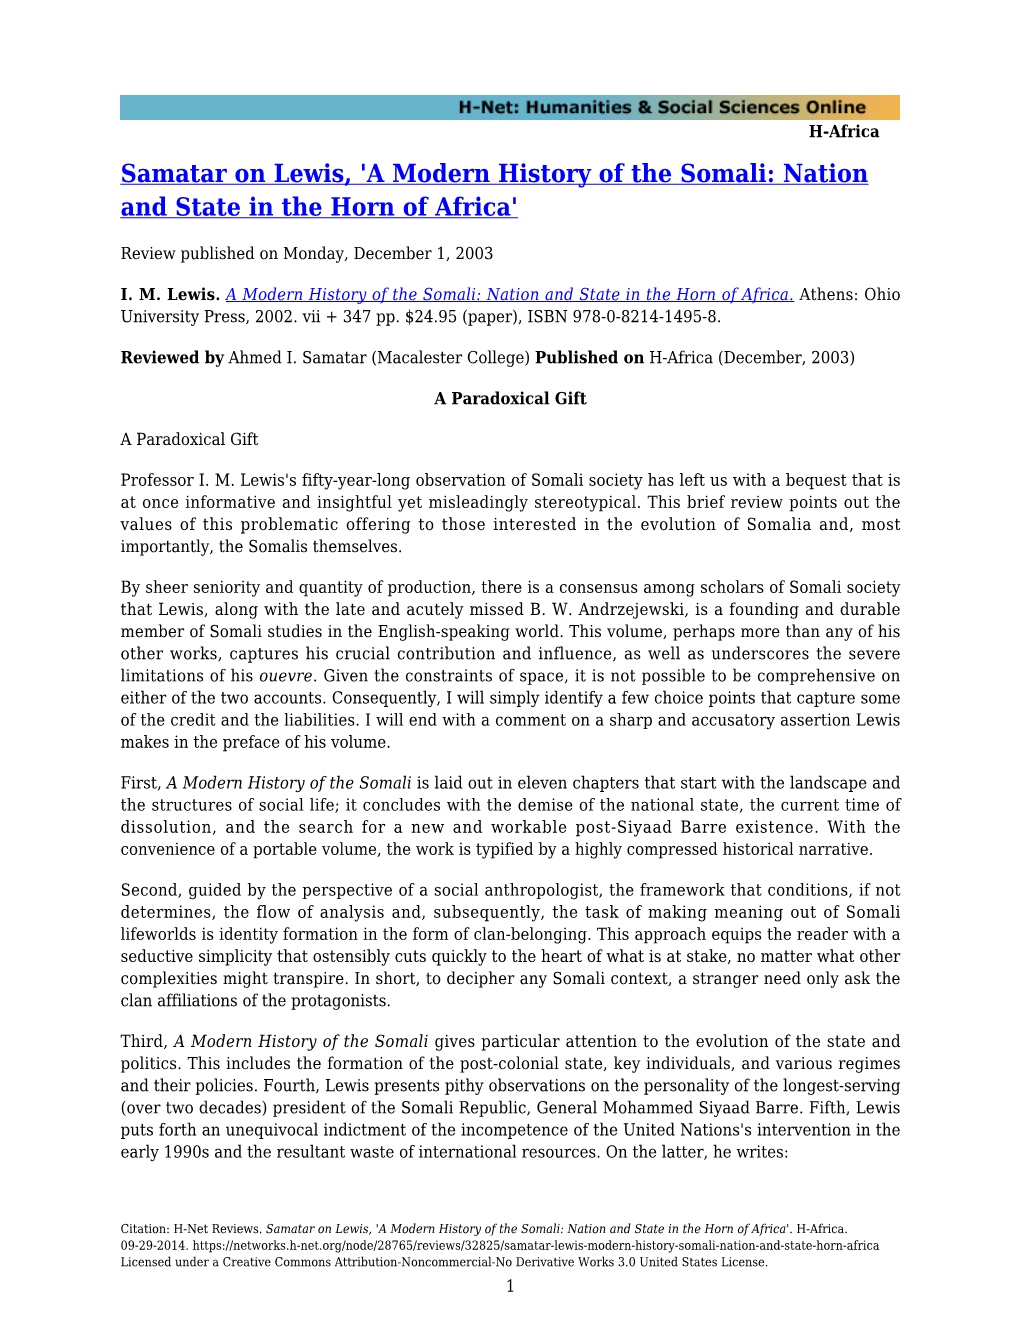 Samatar on Lewis, 'A Modern History of the Somali: Nation and State in the Horn of Africa'